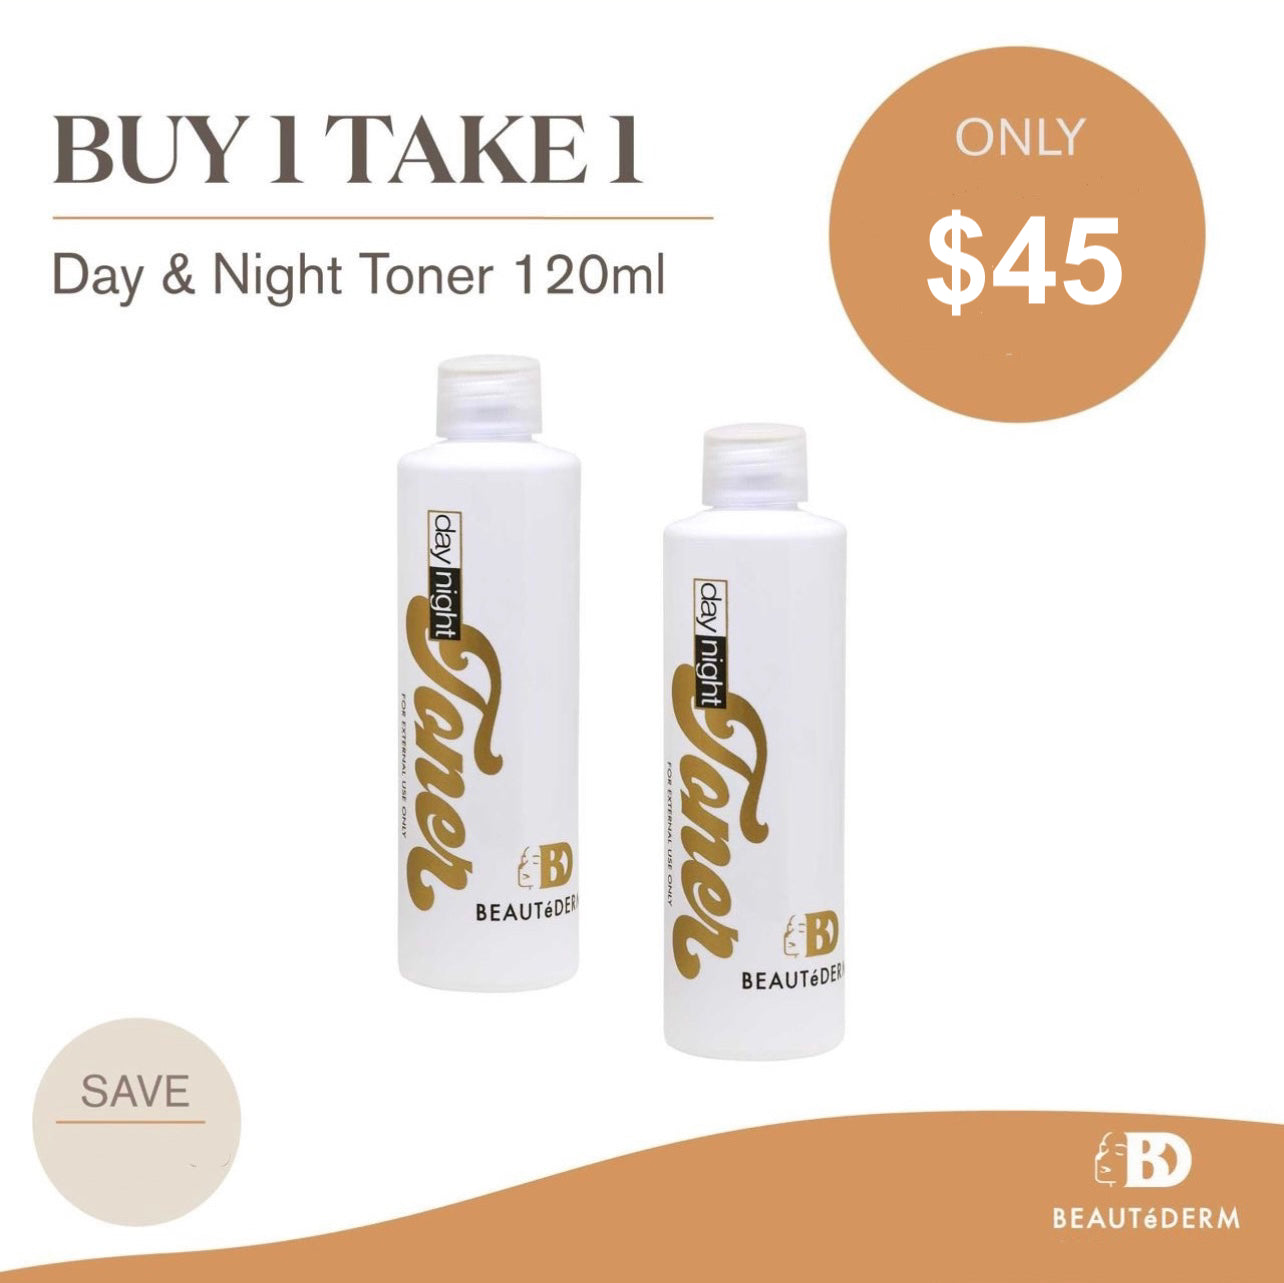 Day and Night Toner 120ml BUY 1 GET 1 FREE